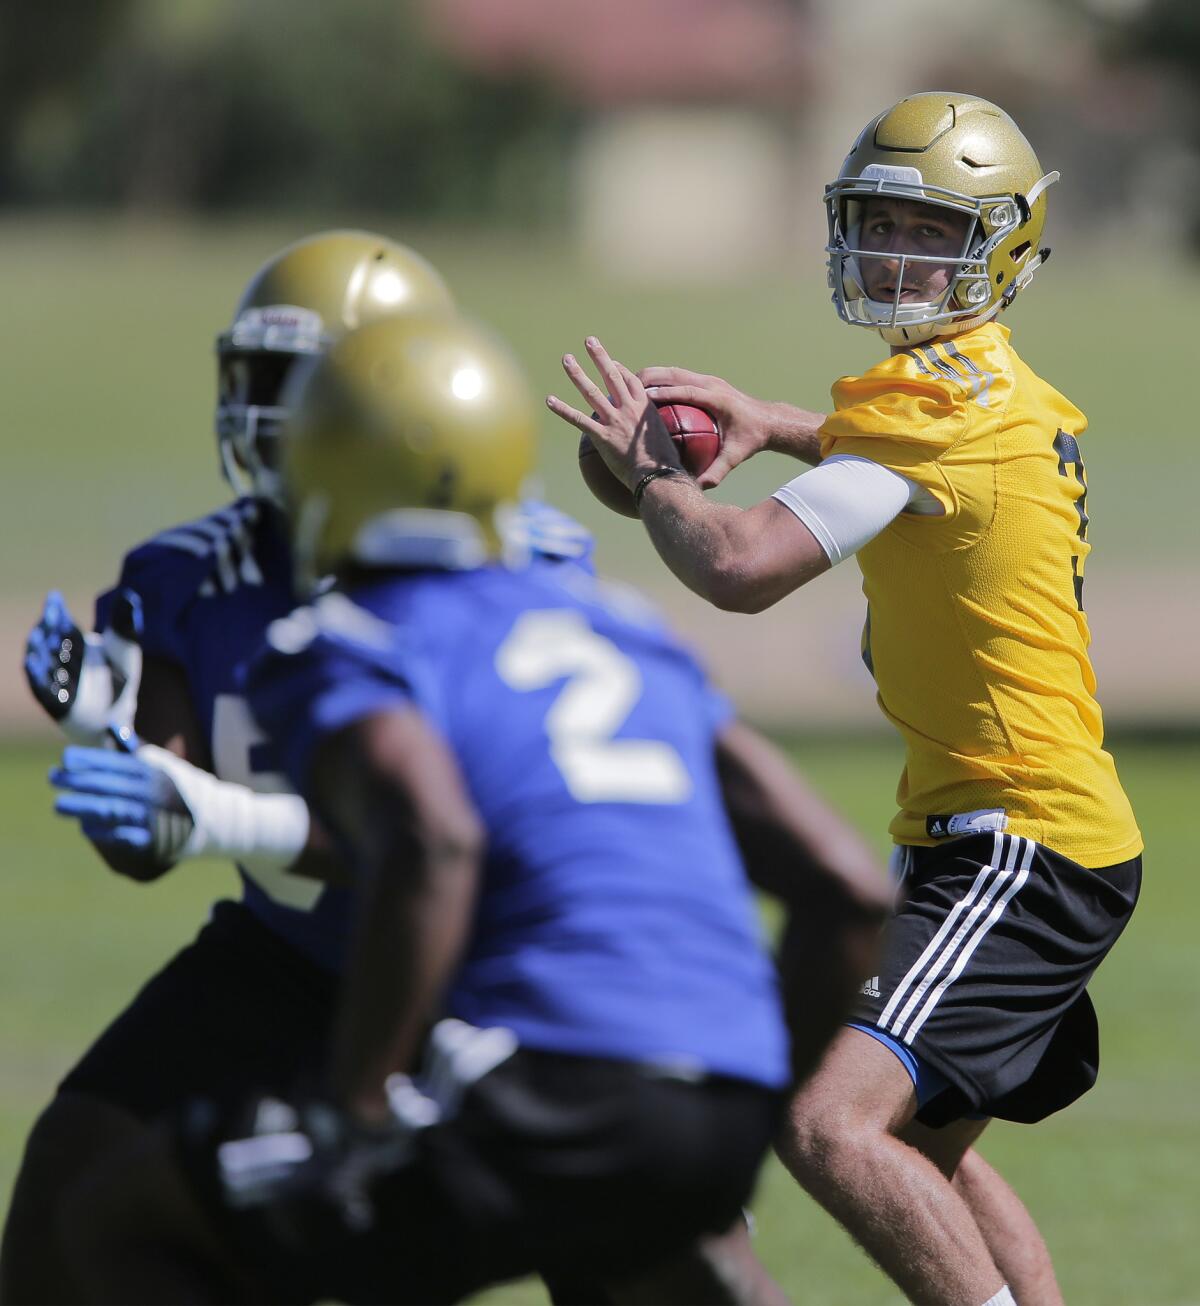 UCLA freshman quarterback Josh Rosen looks for an open receiver during the first day of summer camp at Cal State San Bernardino.